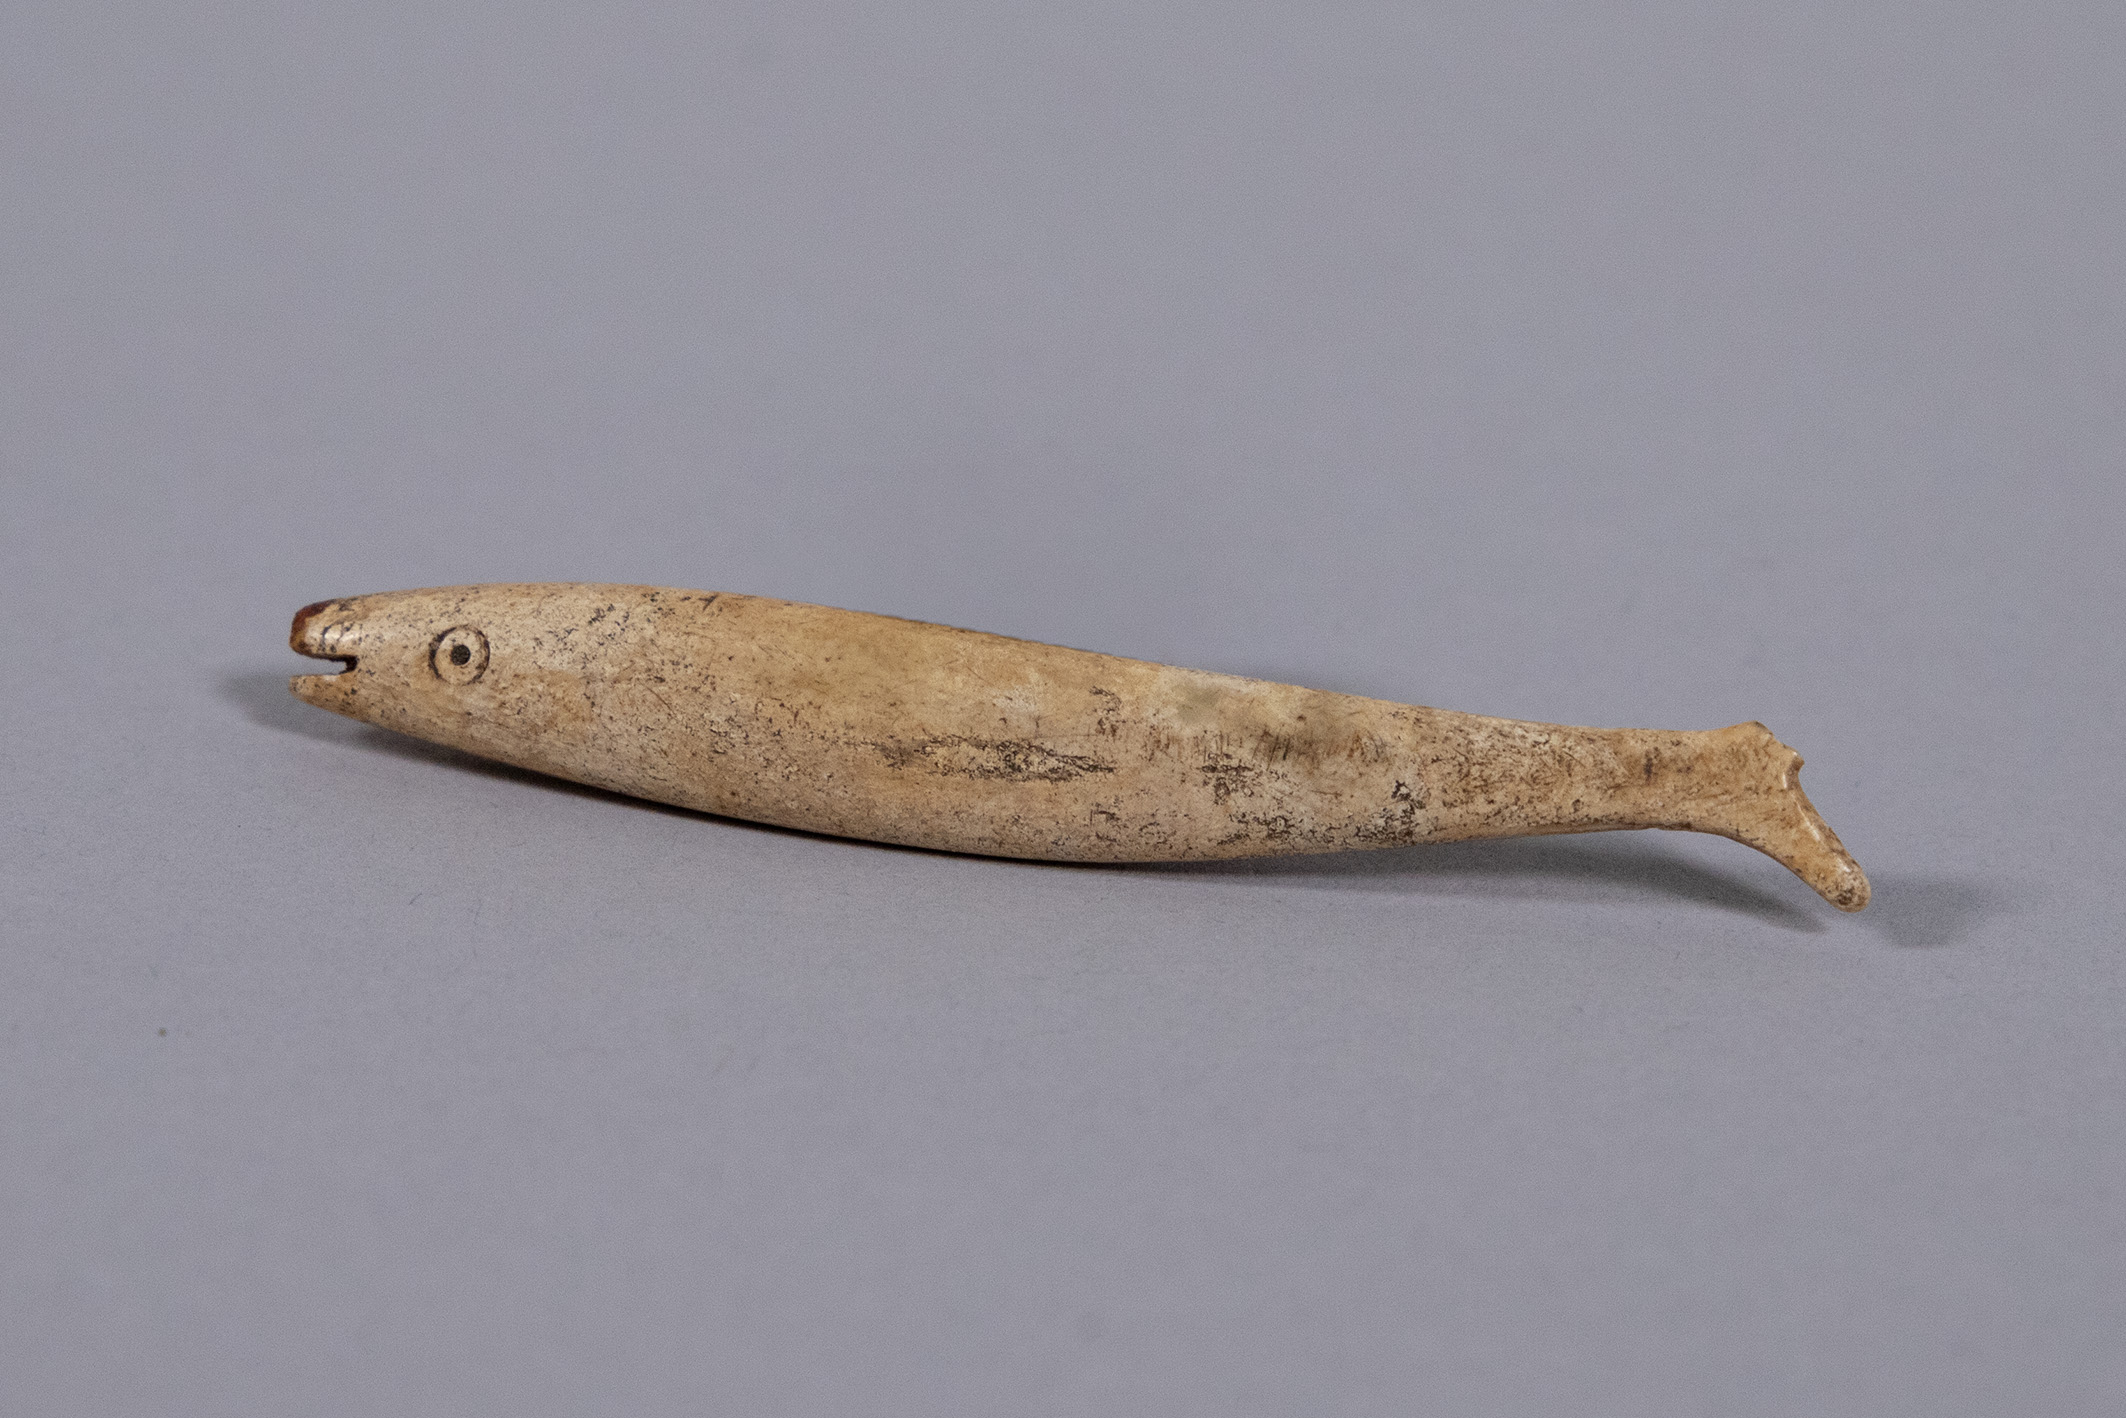 200-year-old fish made from animal bone.